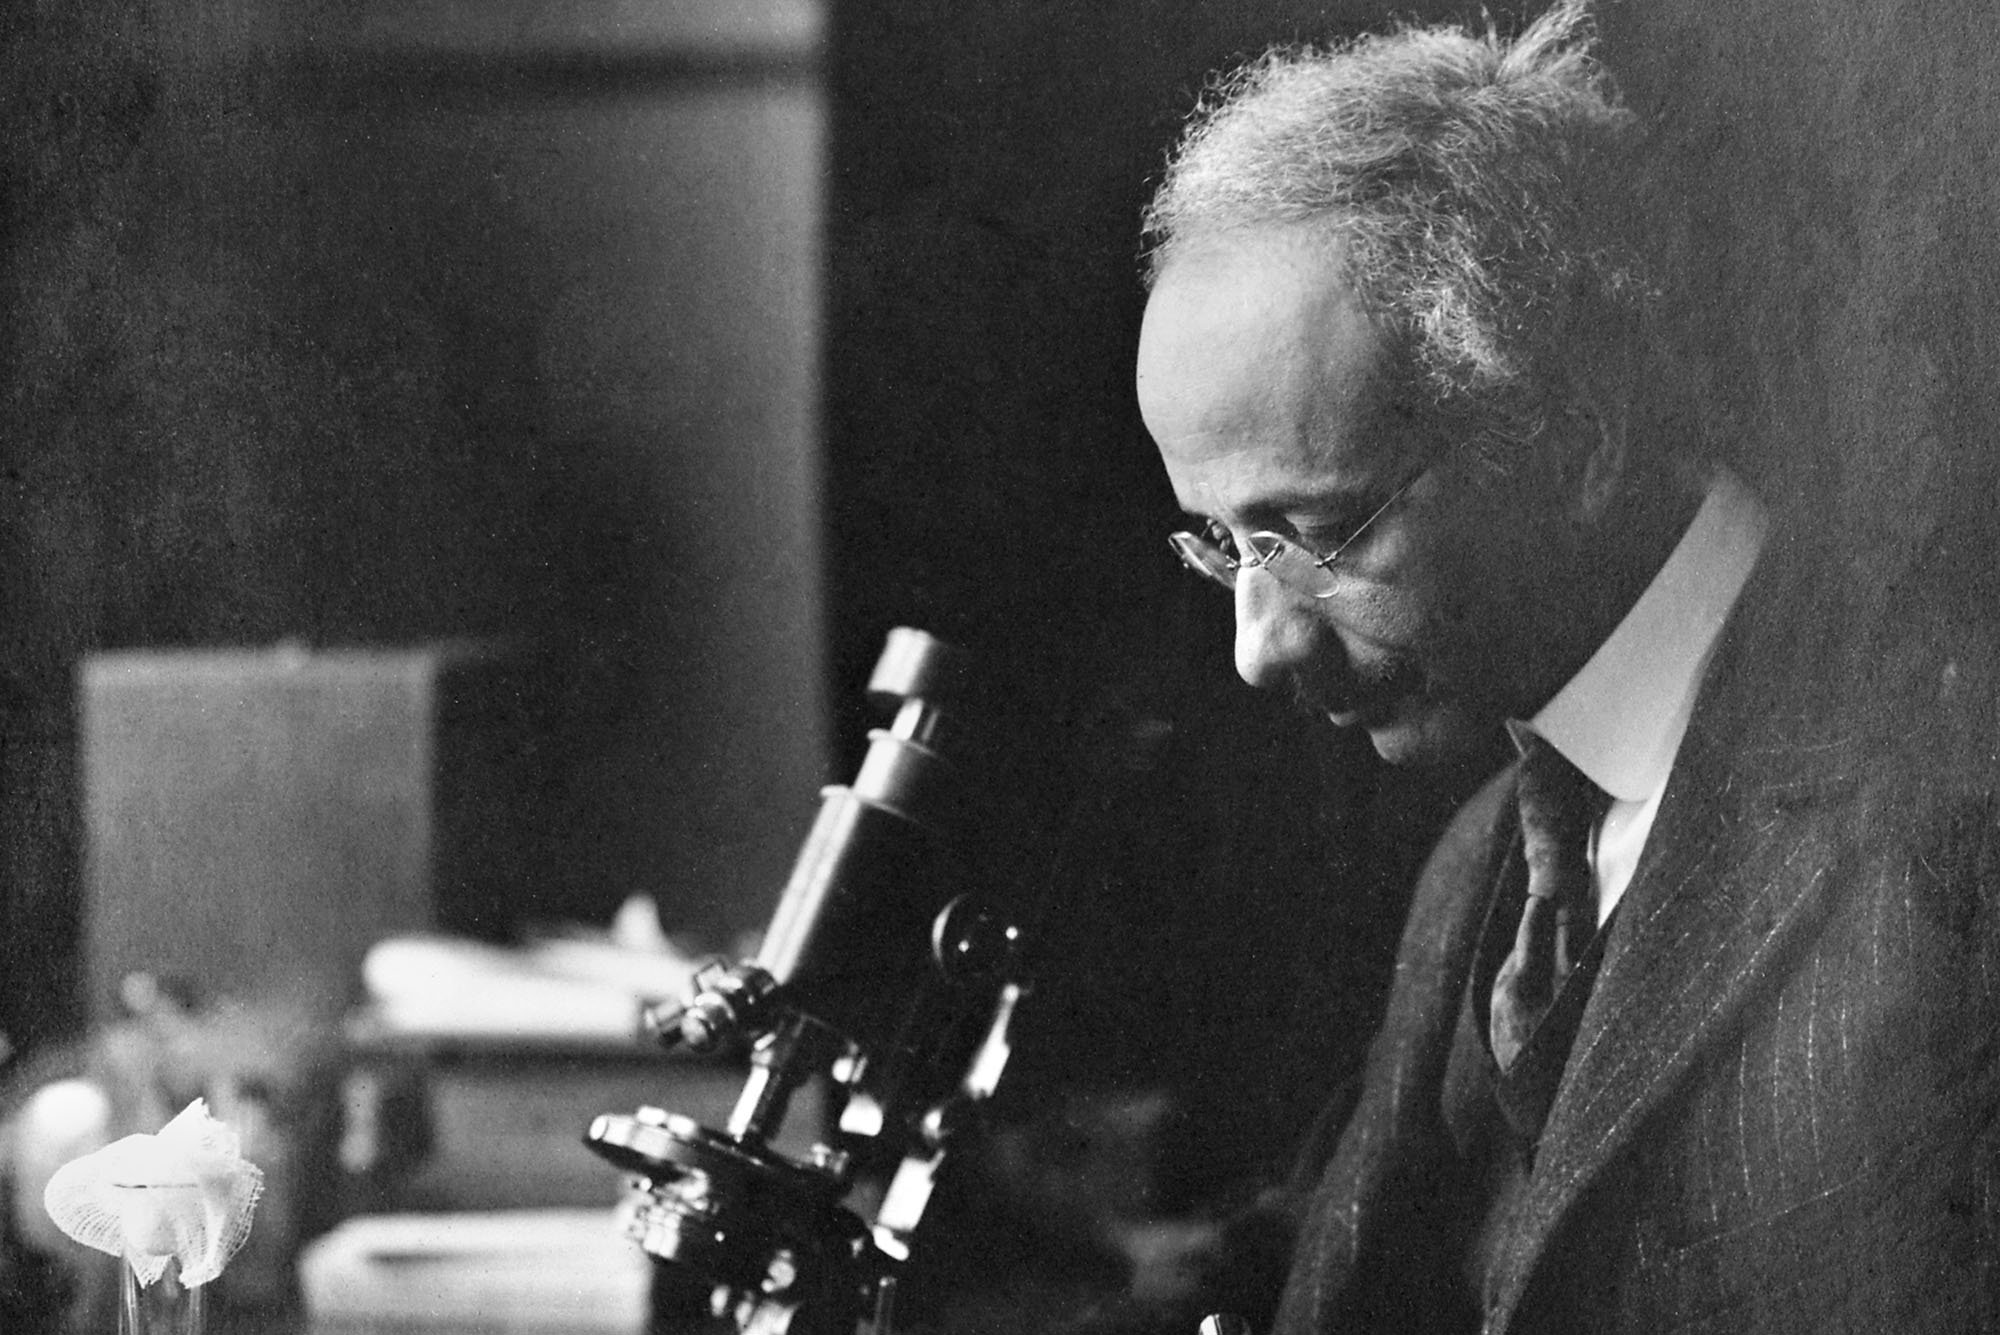 Photo: Black and white photo or Soloman Carter Fuller, the nation's first the nation’s first Black psychiatrist, looking into a microscope.